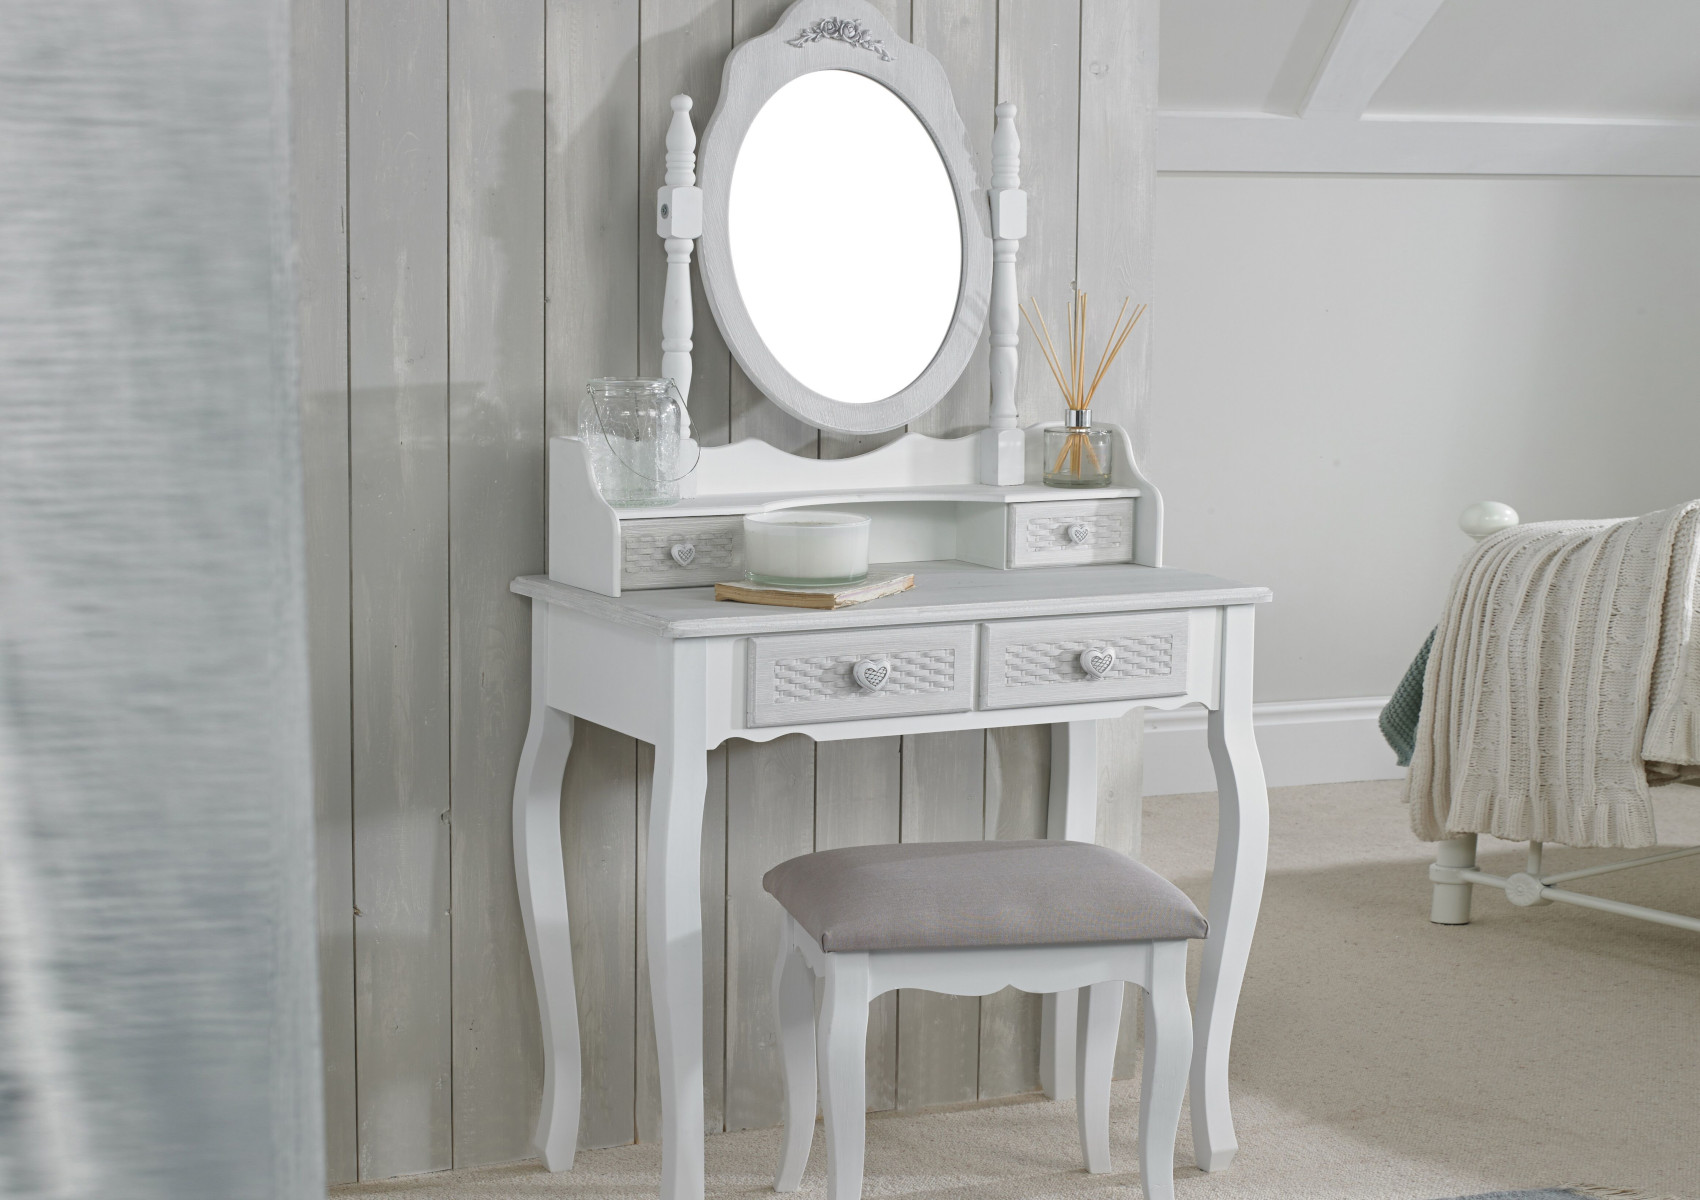 View Brittany WhiteGrey Dressing Table Time4Sleep information